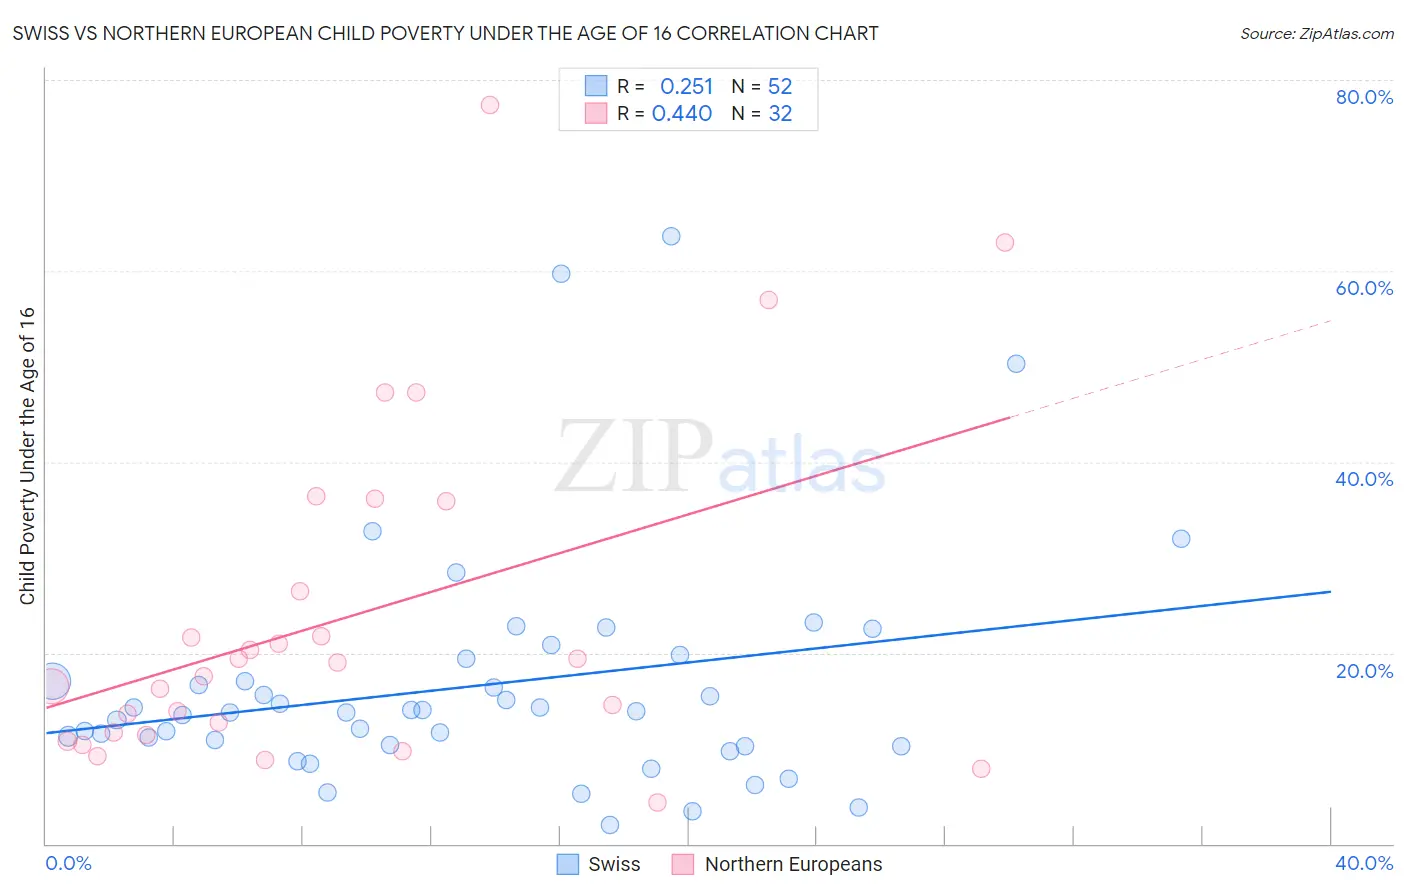 Swiss vs Northern European Child Poverty Under the Age of 16